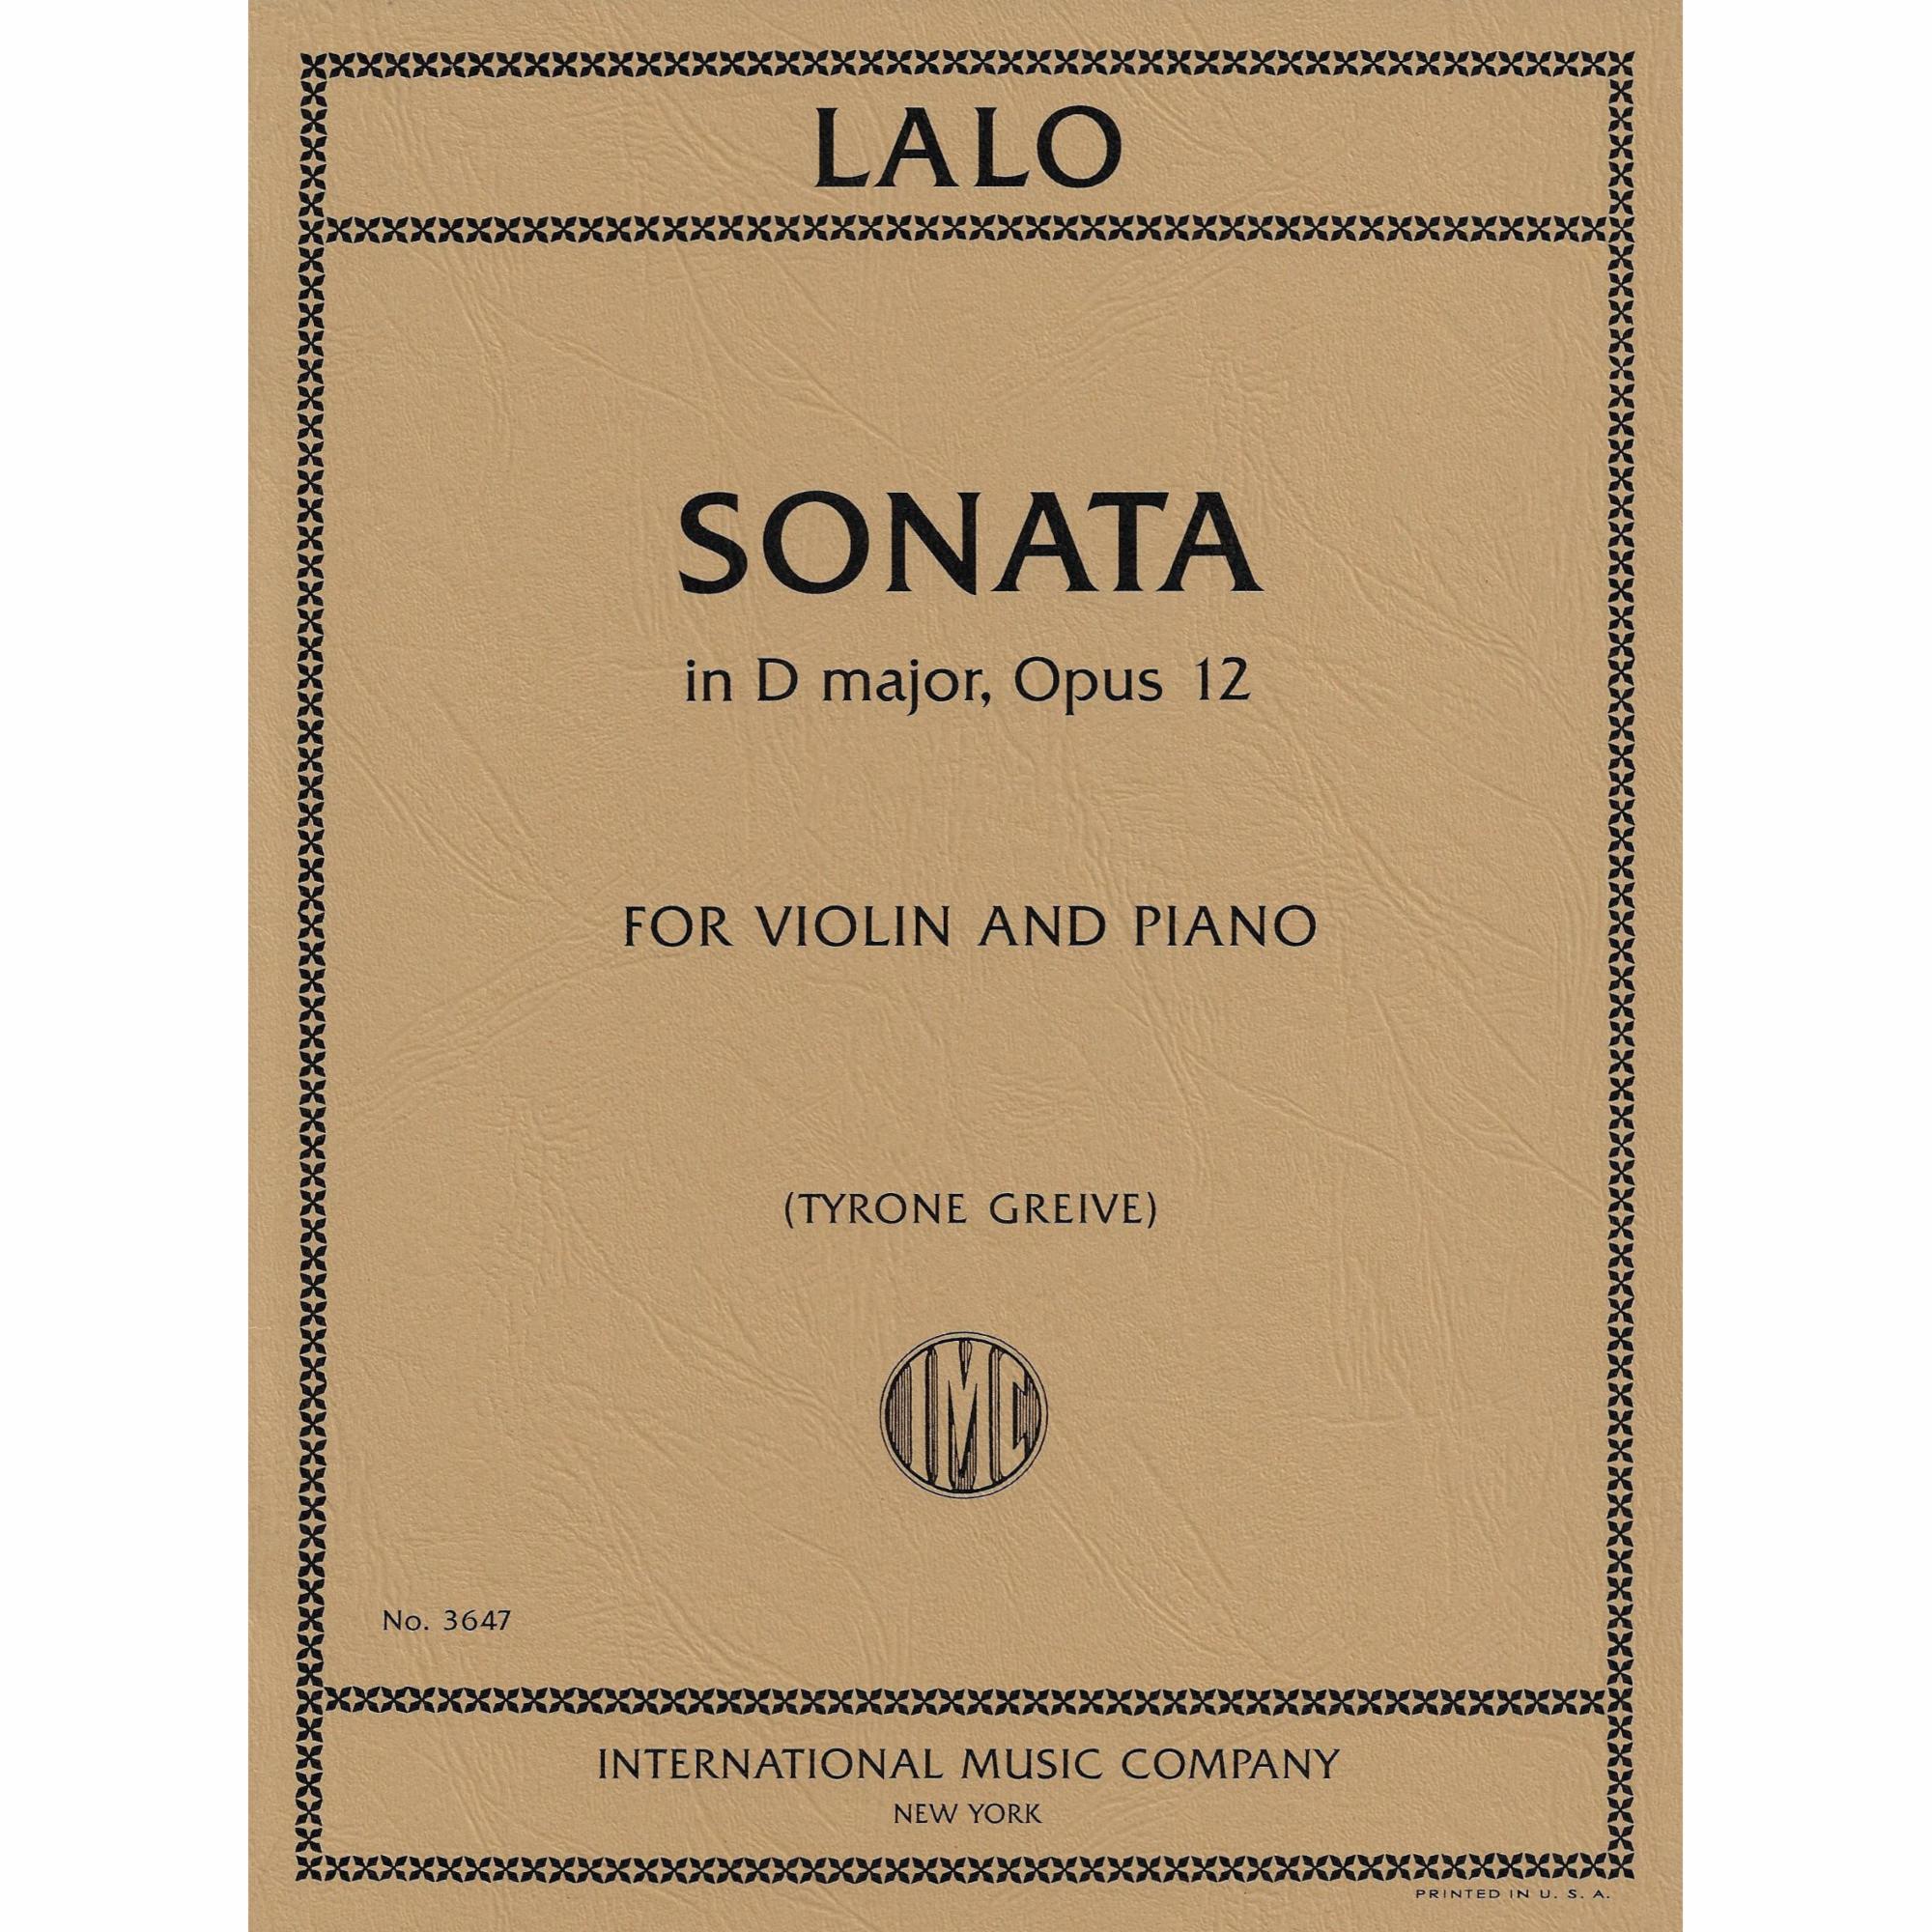 Lalo -- Sonata in D Major, Op. 12 for Violin and Piano